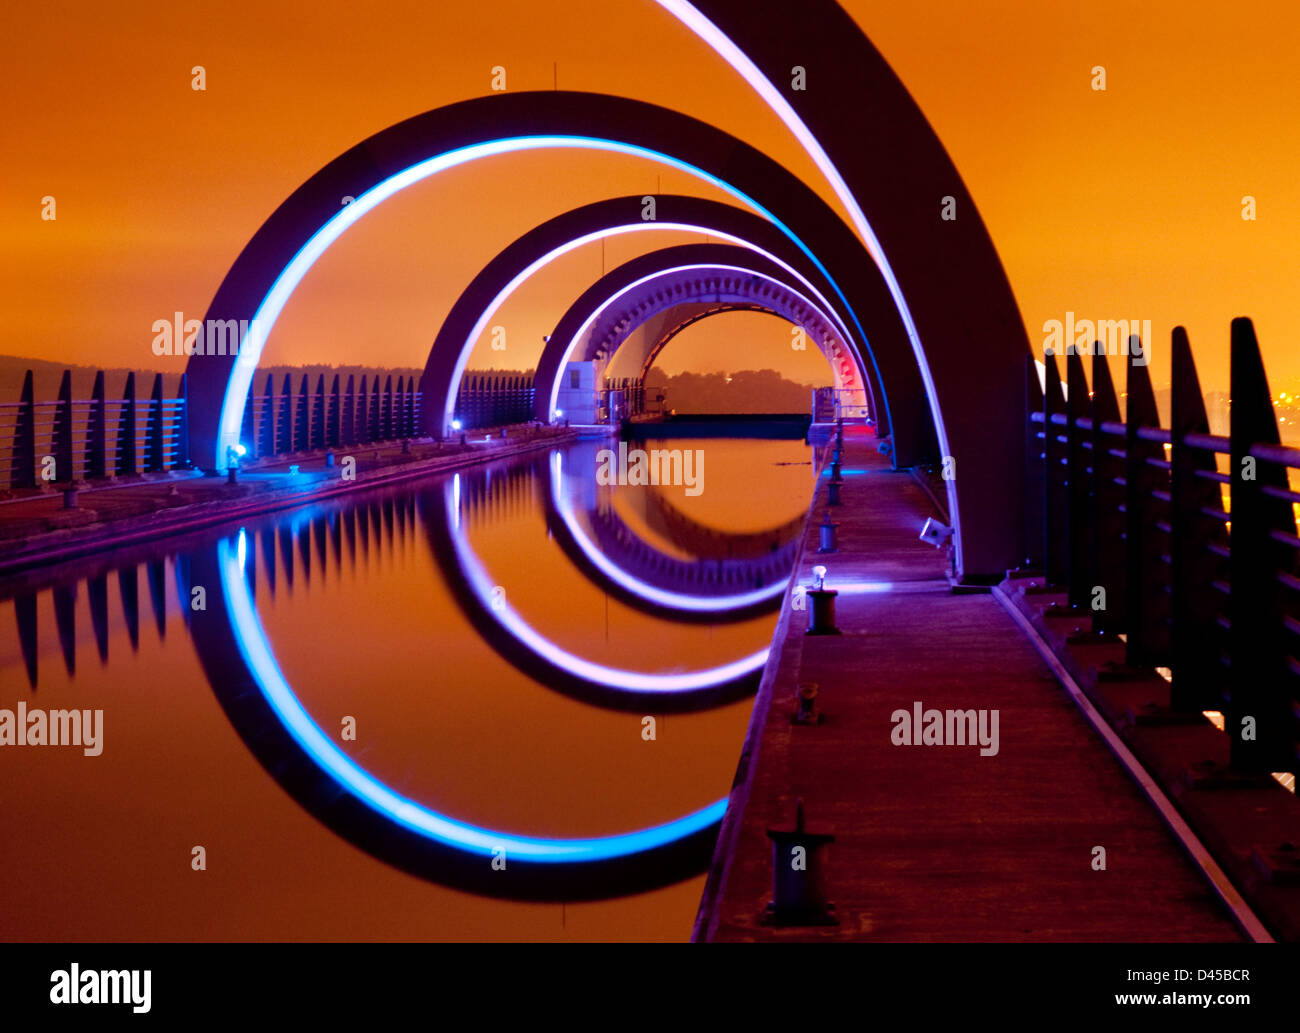 A view of the Falkirk wheel at night, with an orange glow caused by the streetlights of Falkirk. Stock Photo